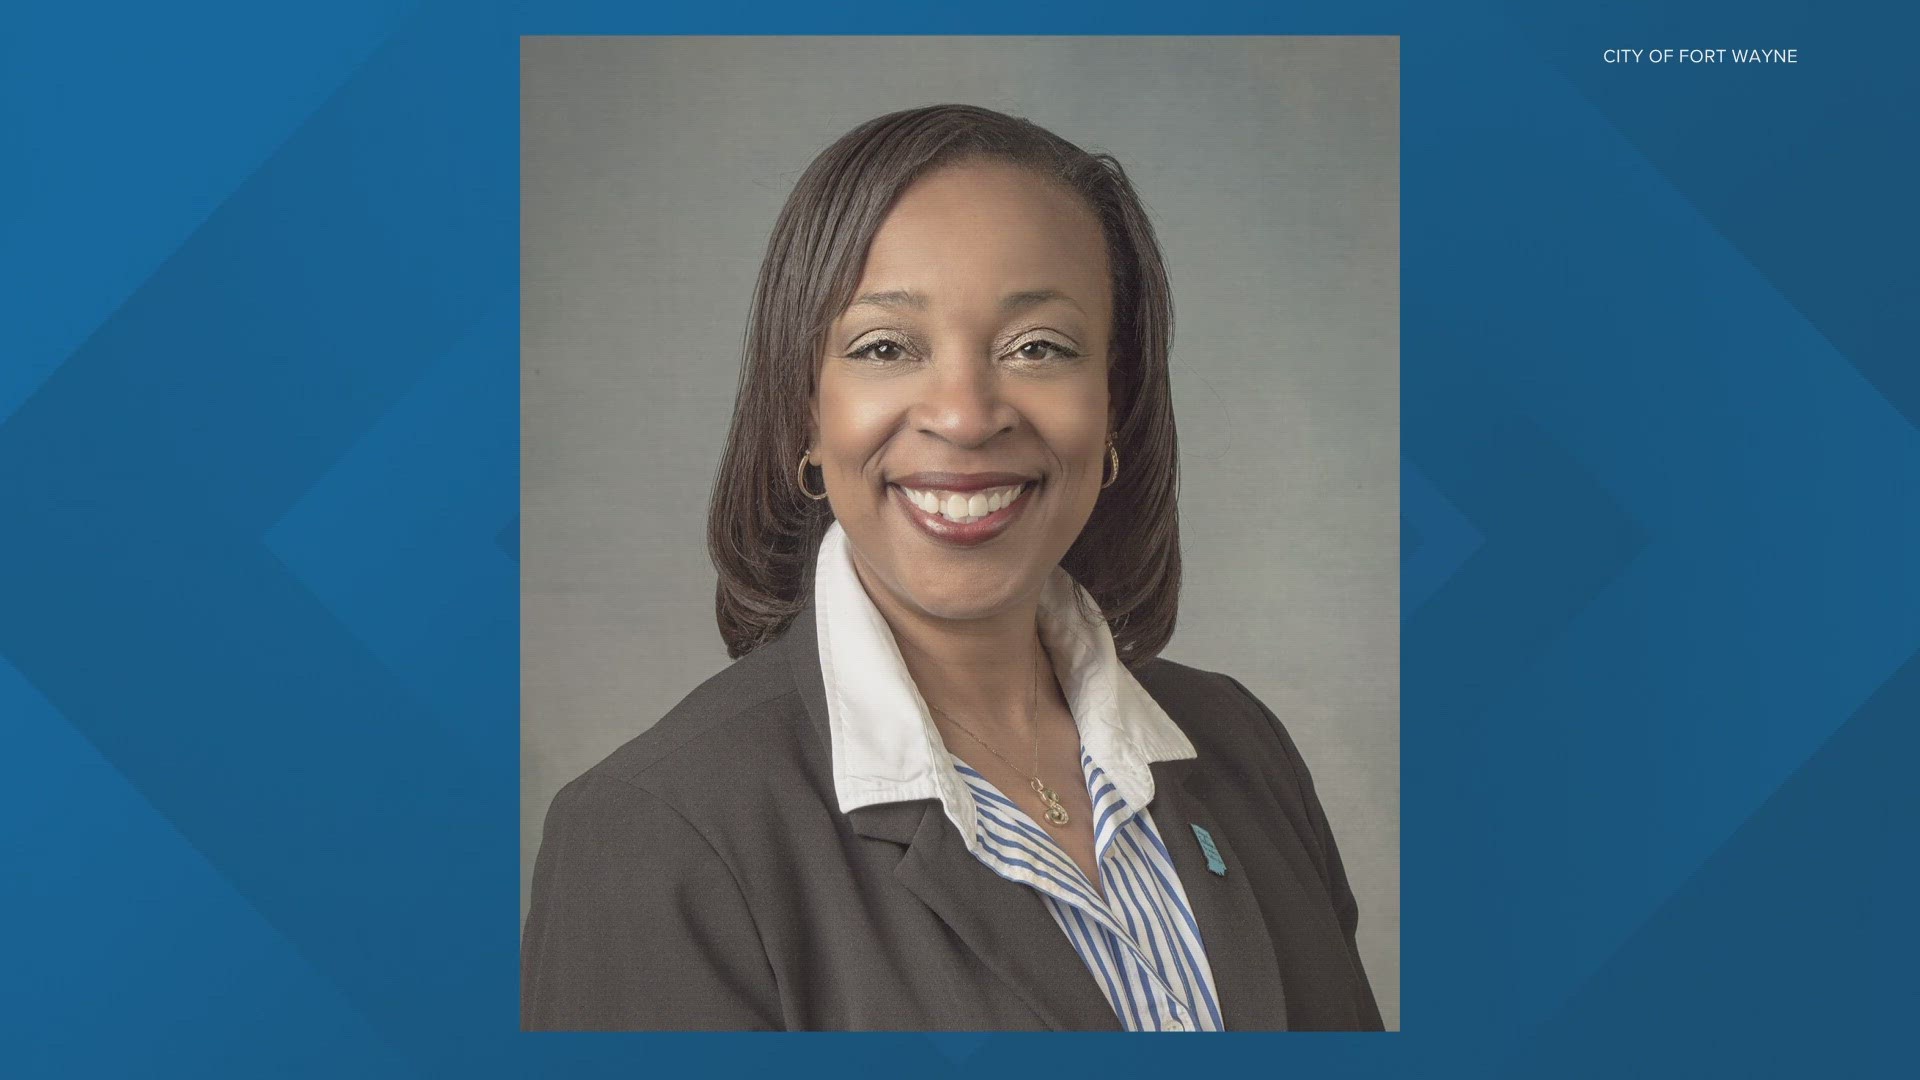 Sharon Tucker was selected today in a Democratic Party caucus to replace the late mayor, Tom Henry.